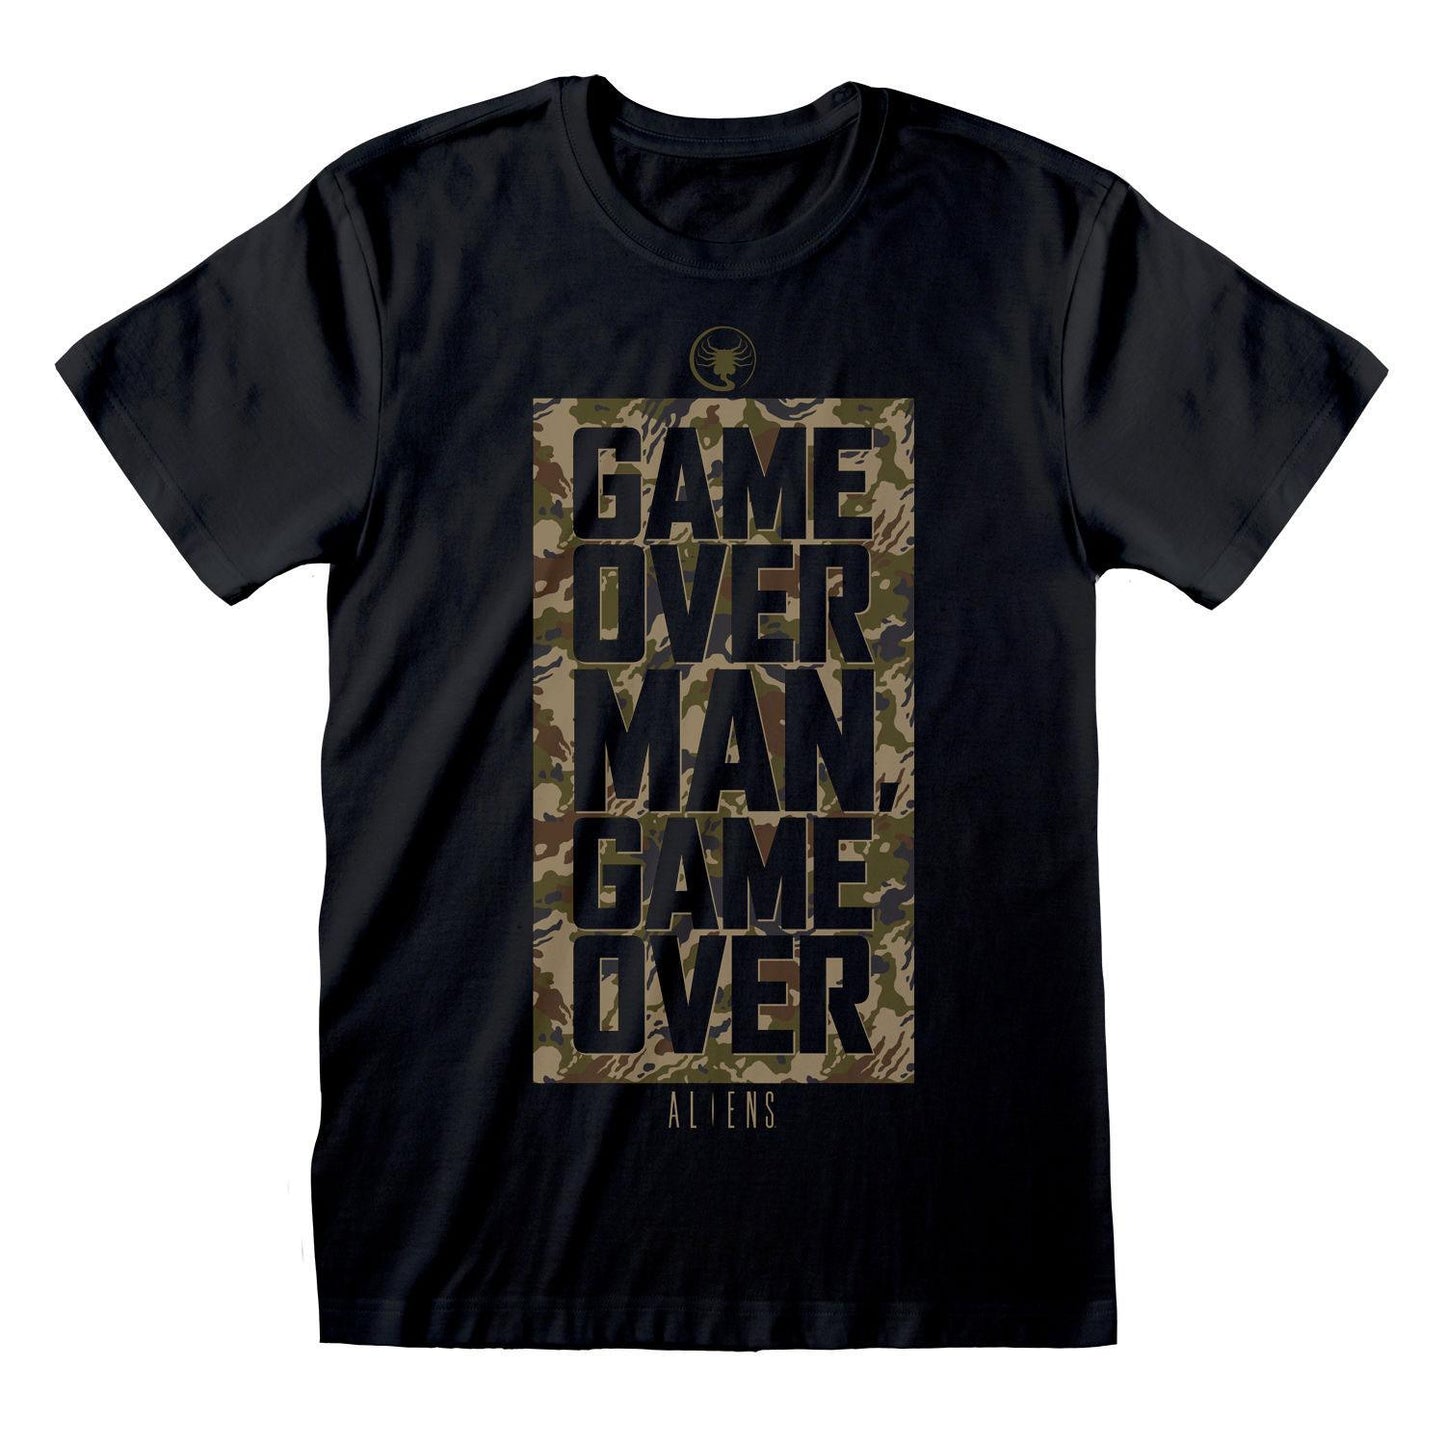 ALIENS Game Over Man! T-Shirt ☆ Officially Licensed Clothing Size Medium M